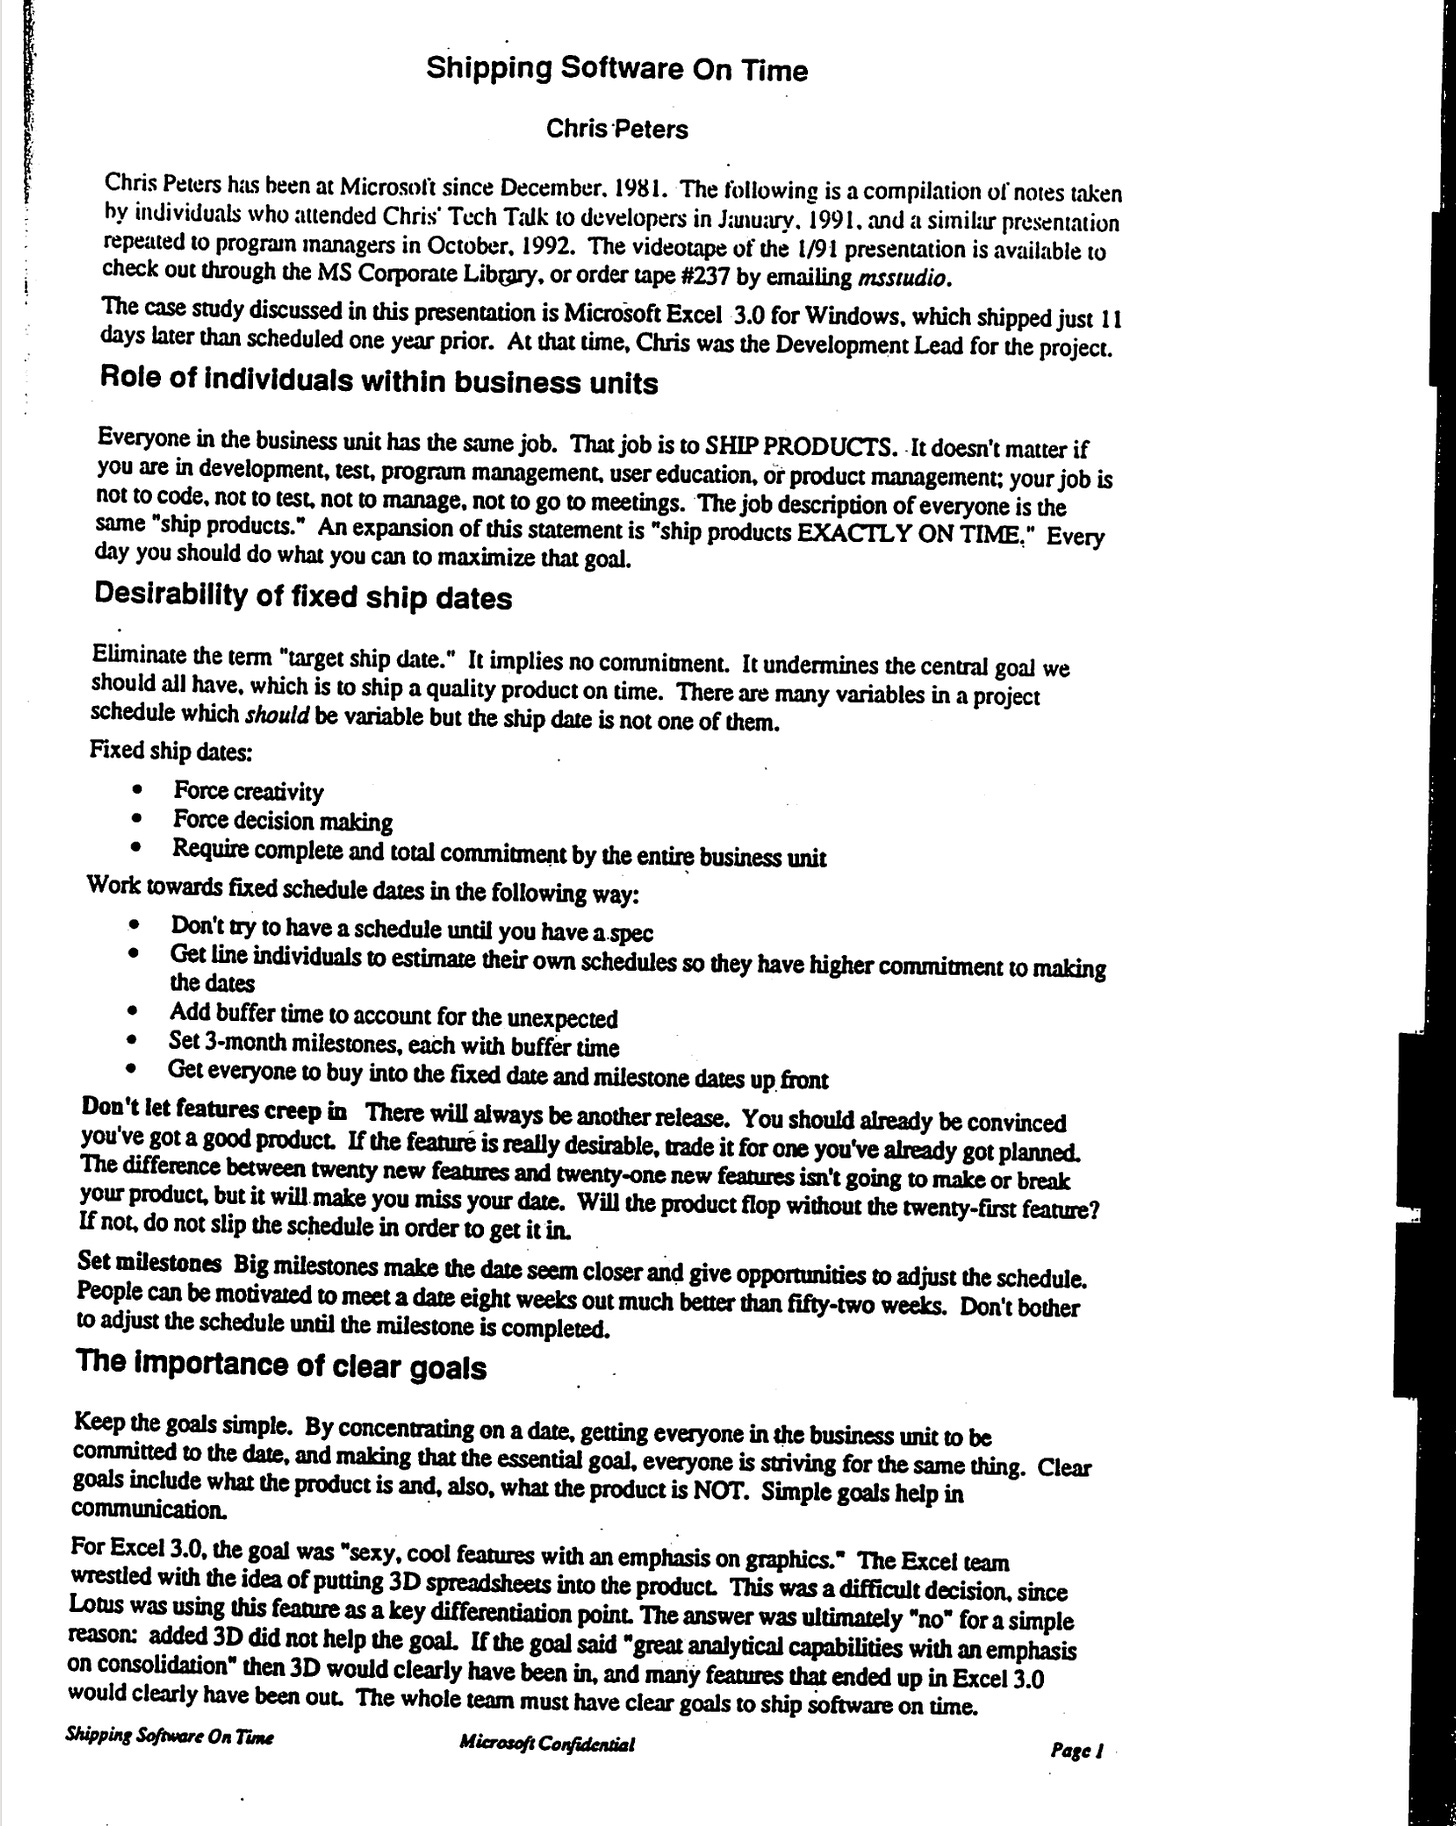 First page of photocopied memo about shipping software from Chris Peters.